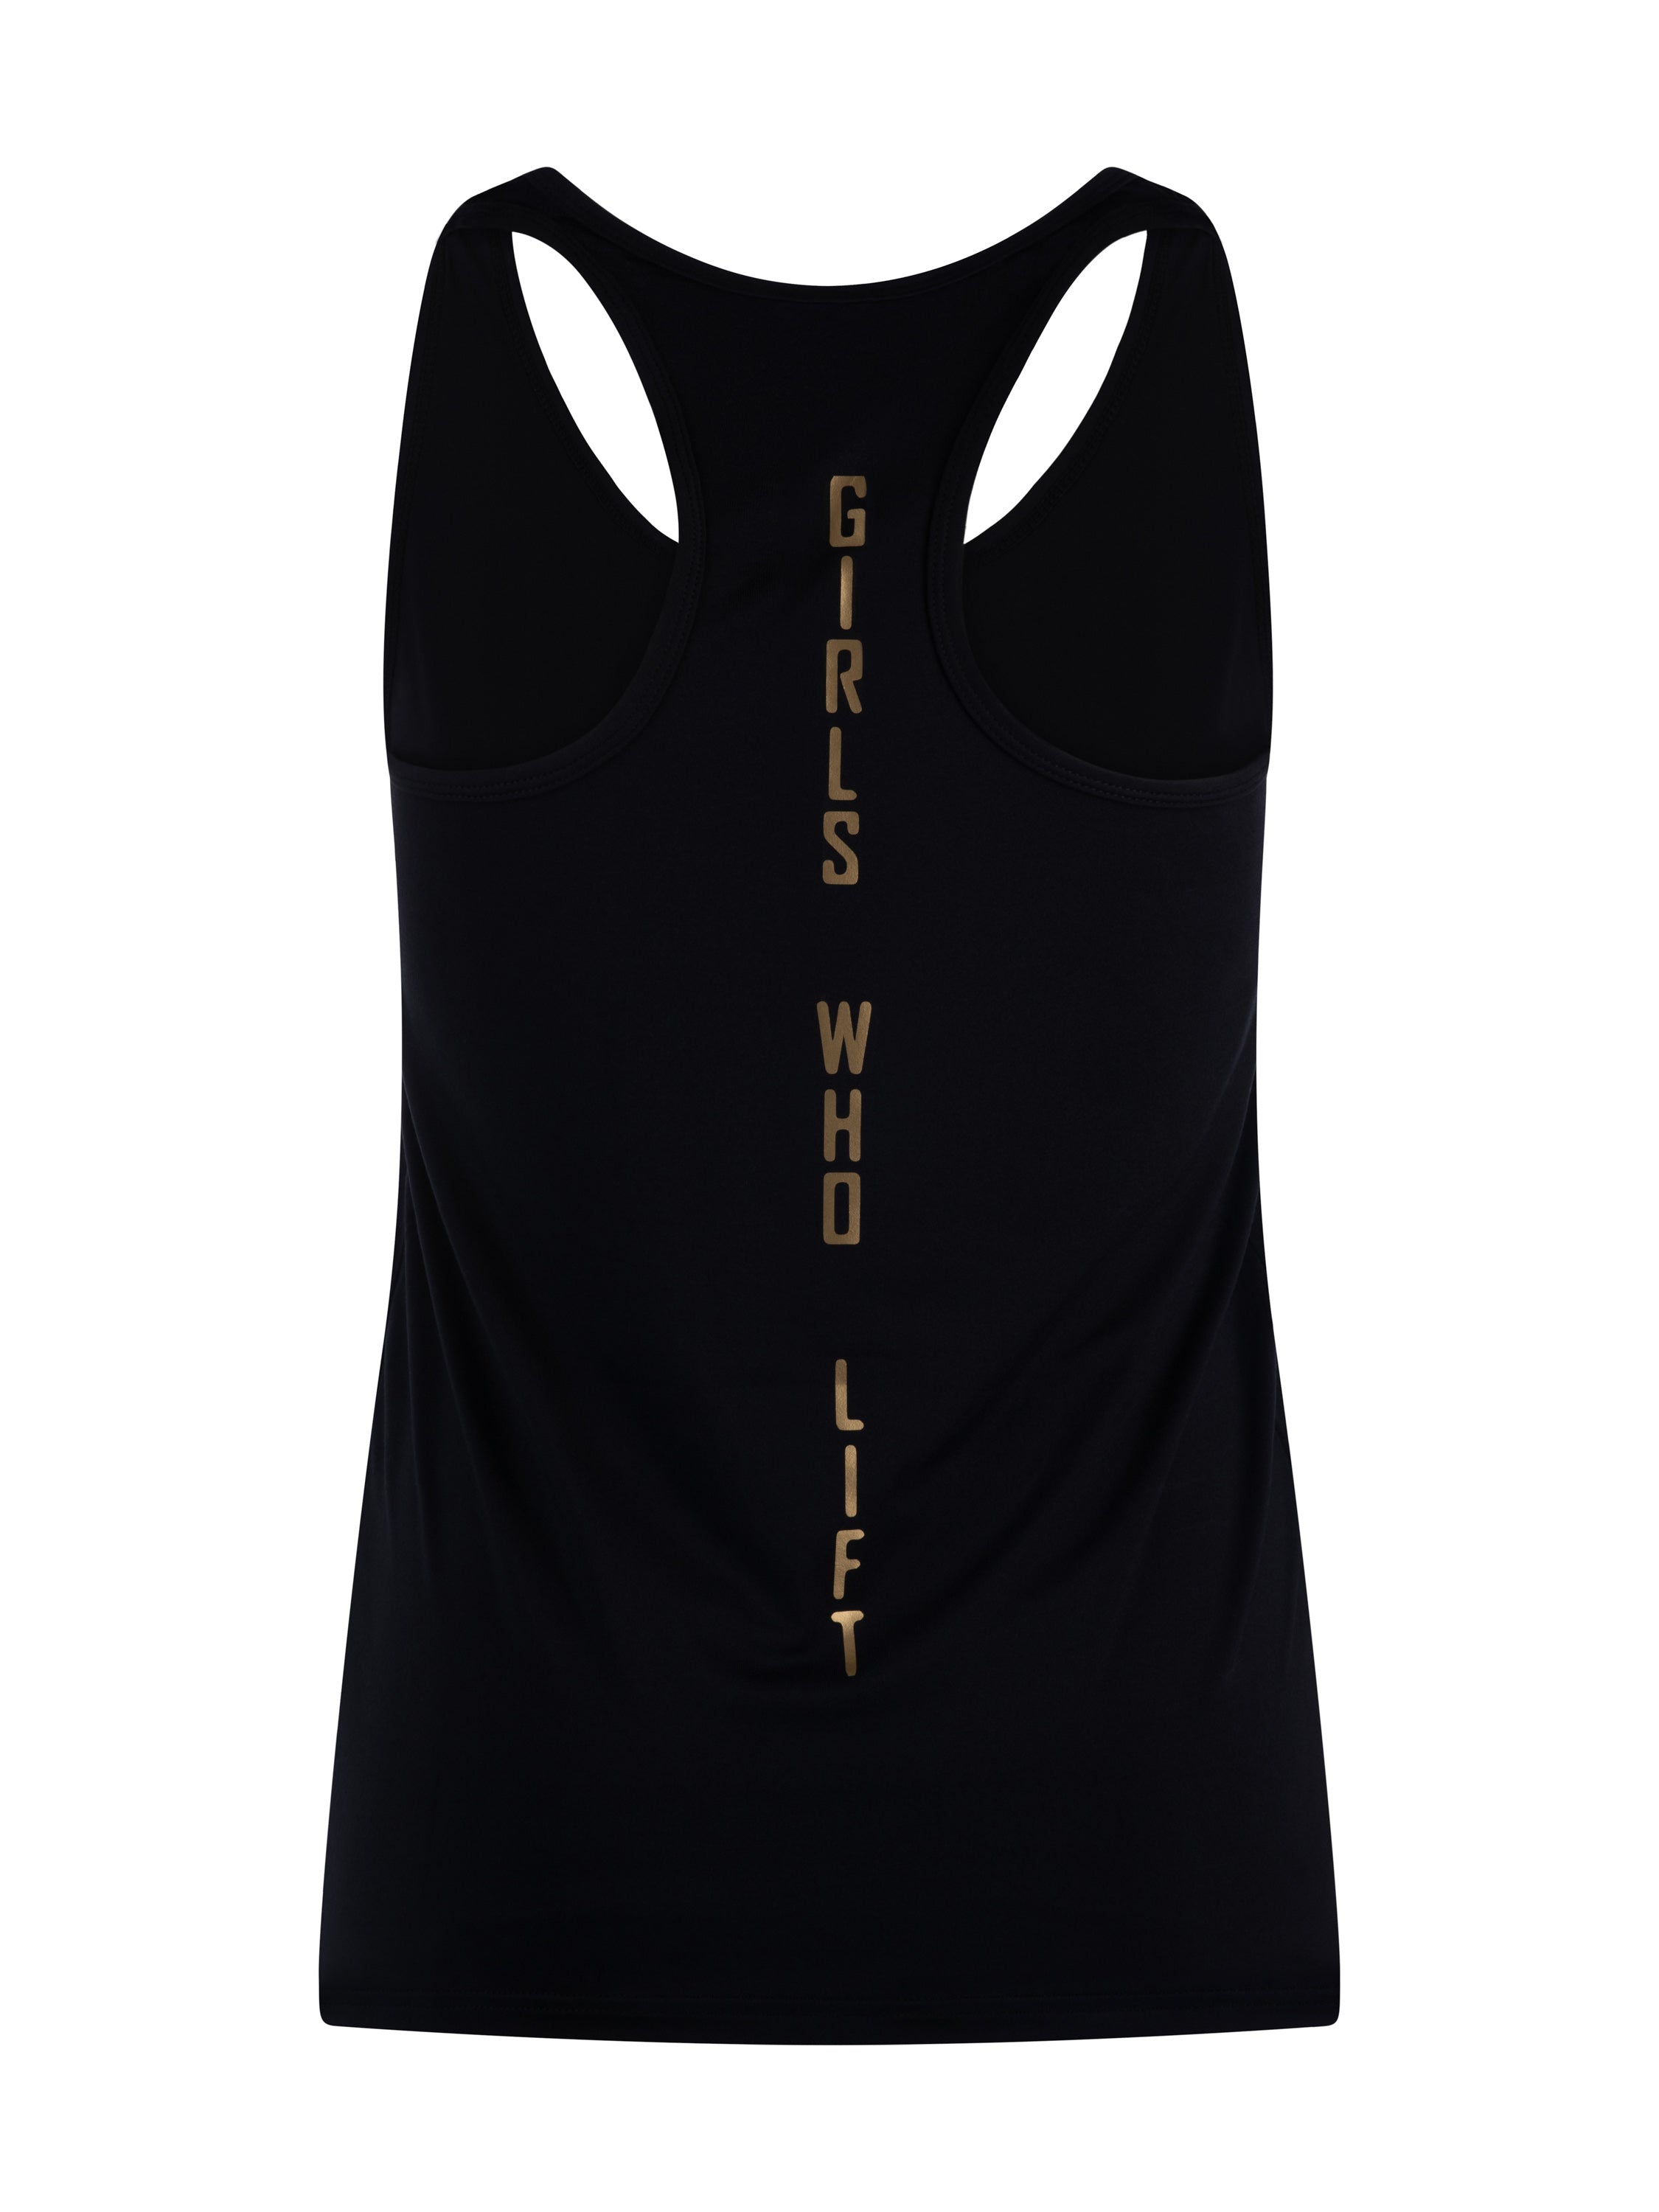 Girls Who Lift workout vest with gold print - reverse view 